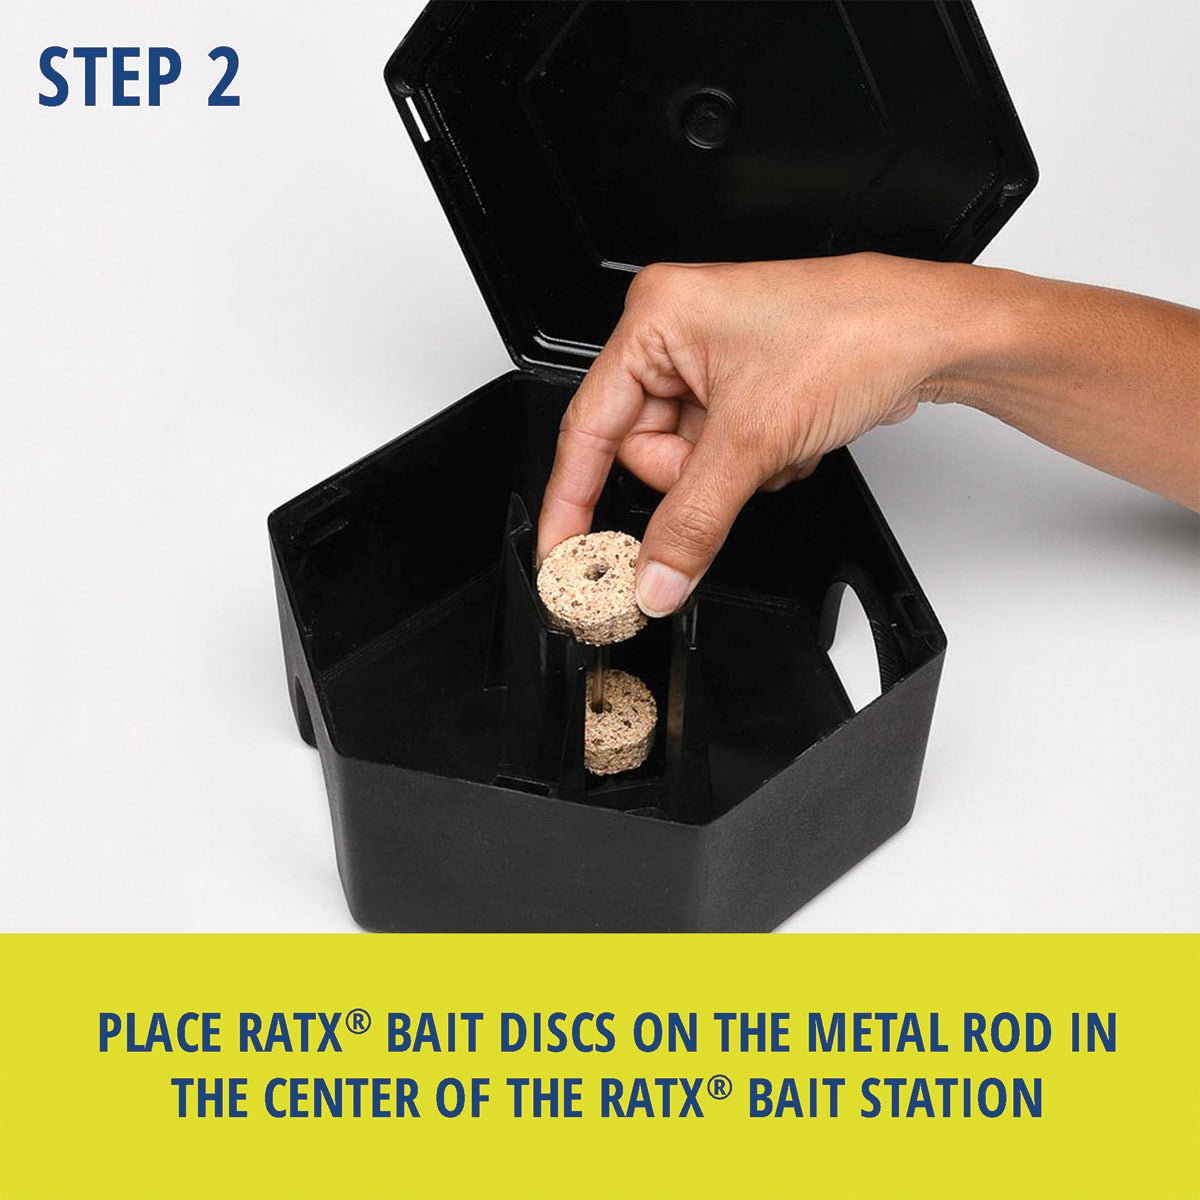 RatX® Small Bait Box. Step 2: Place RatX® Bait Discs on the metal rod in the center of the RatX® Bait Station